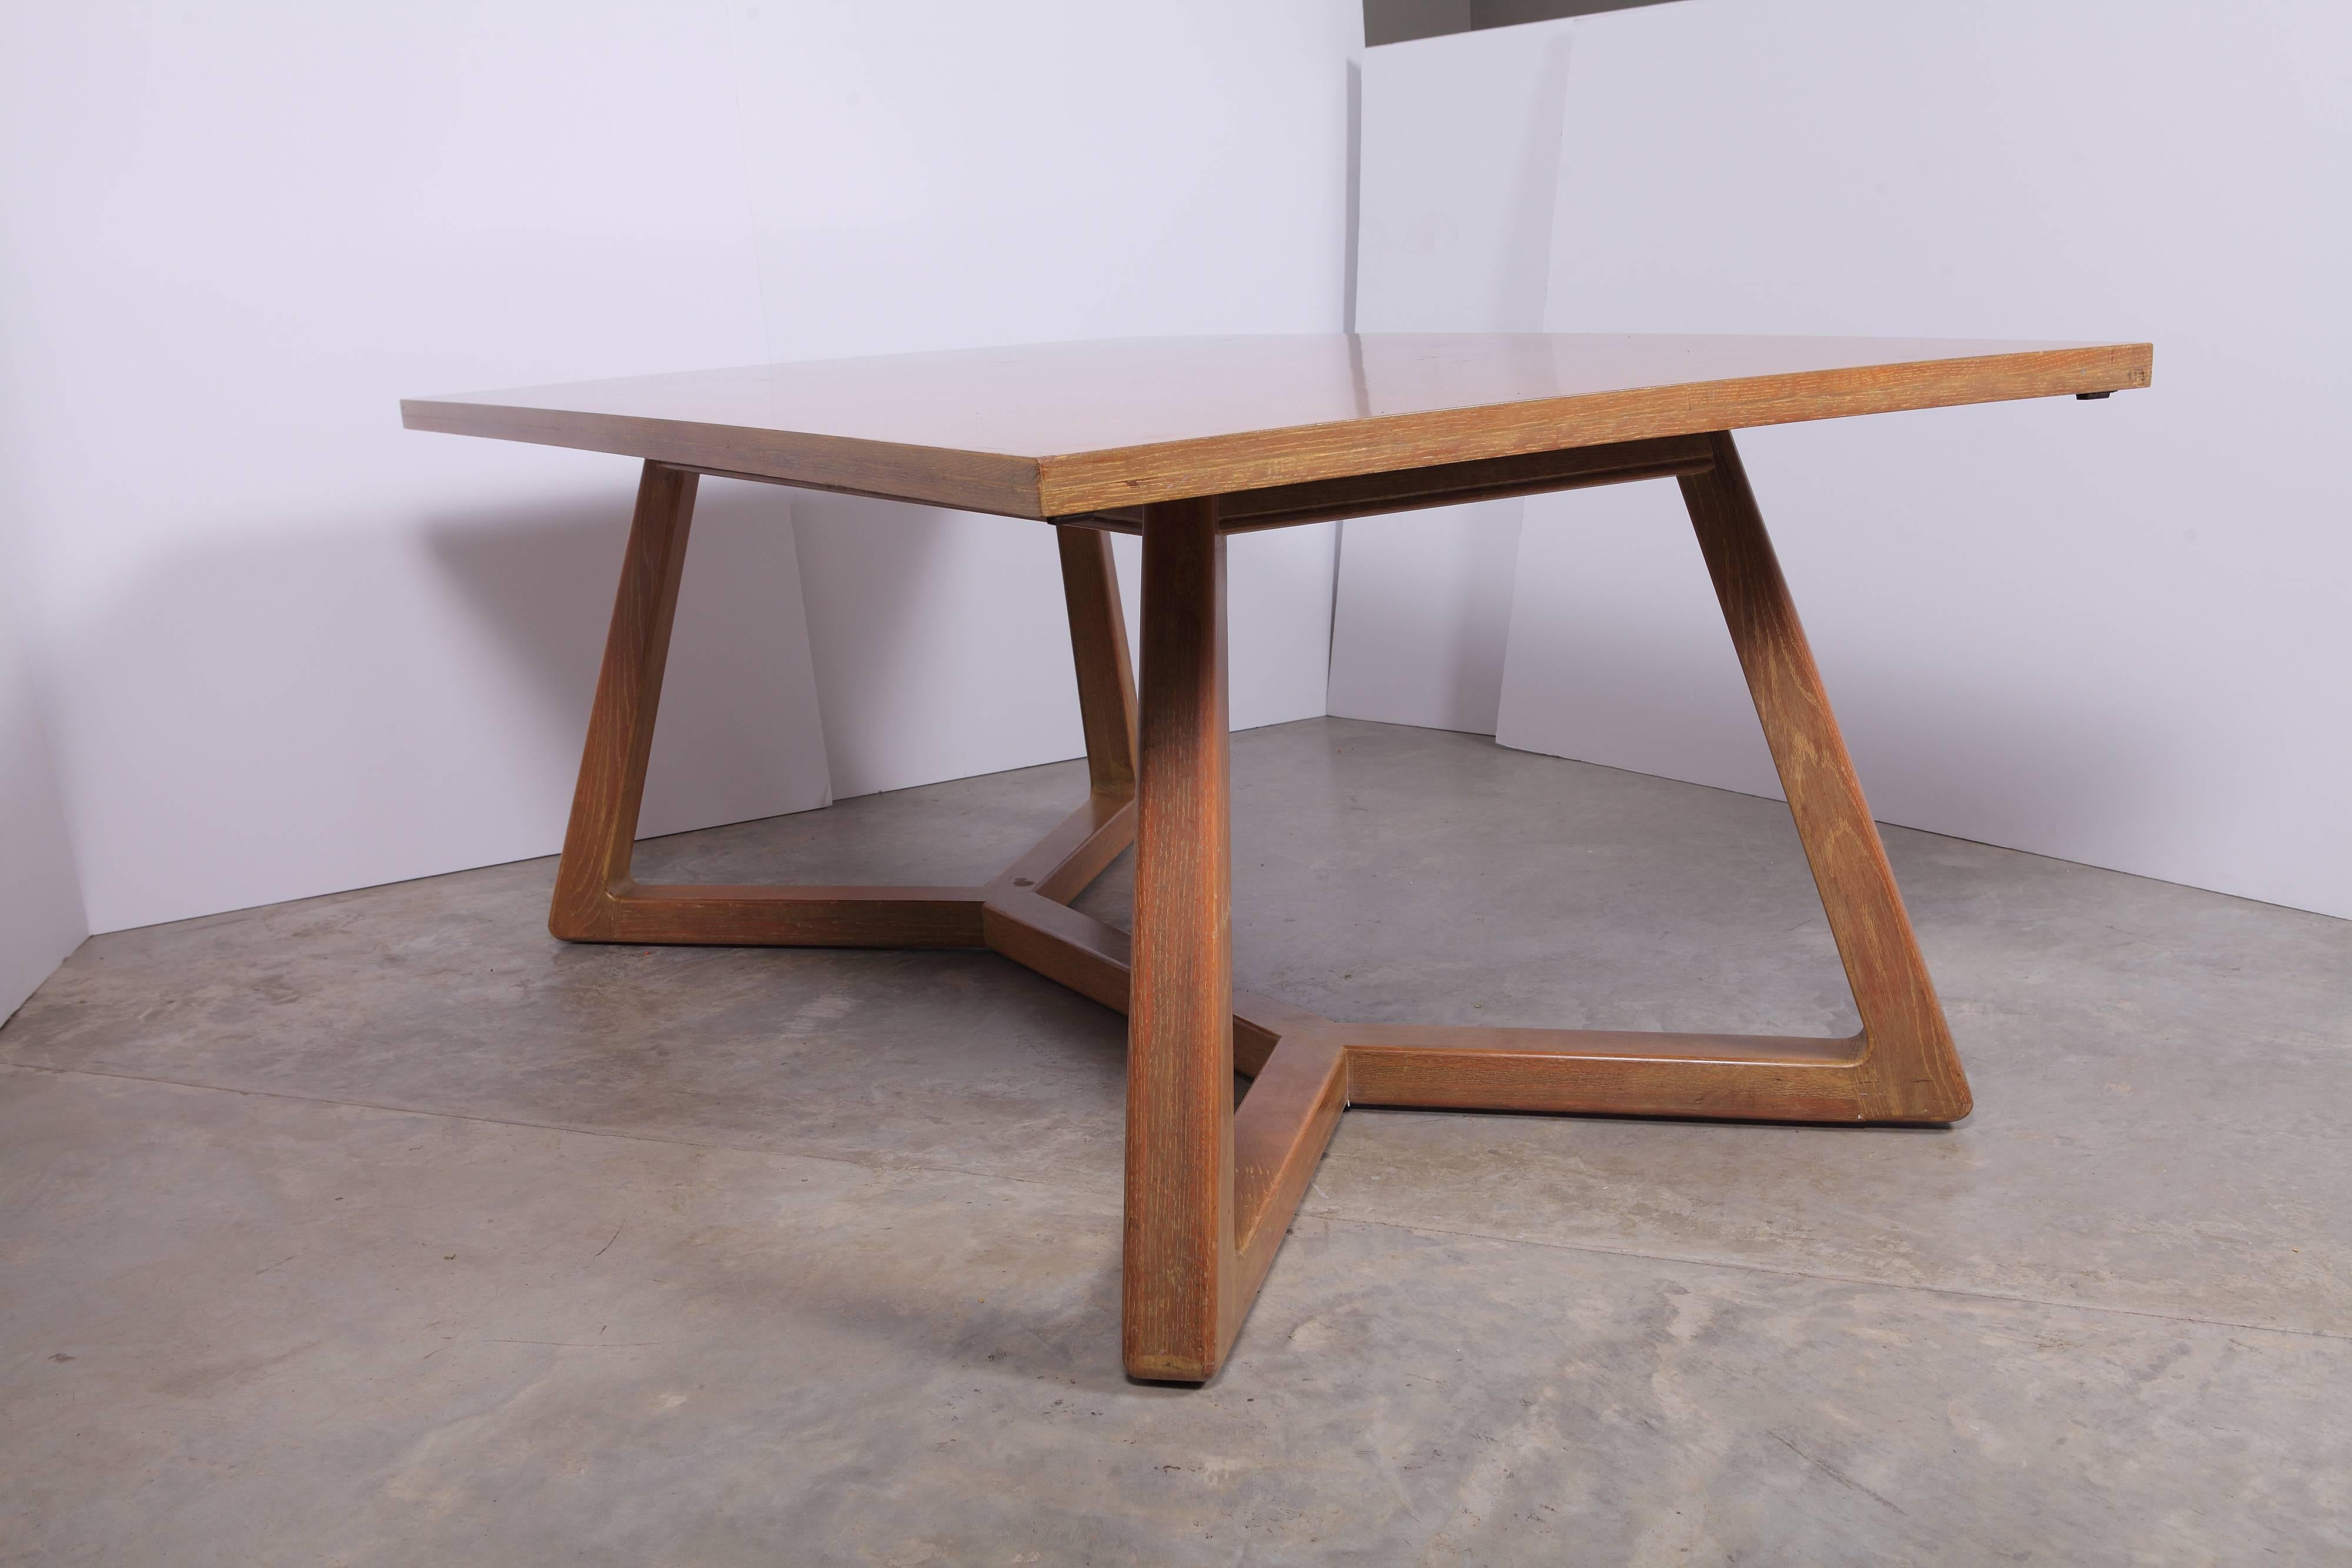 Handsome and substantial 20th century limed oak Romweber dining table designed by Harold Schwartz in 1955.